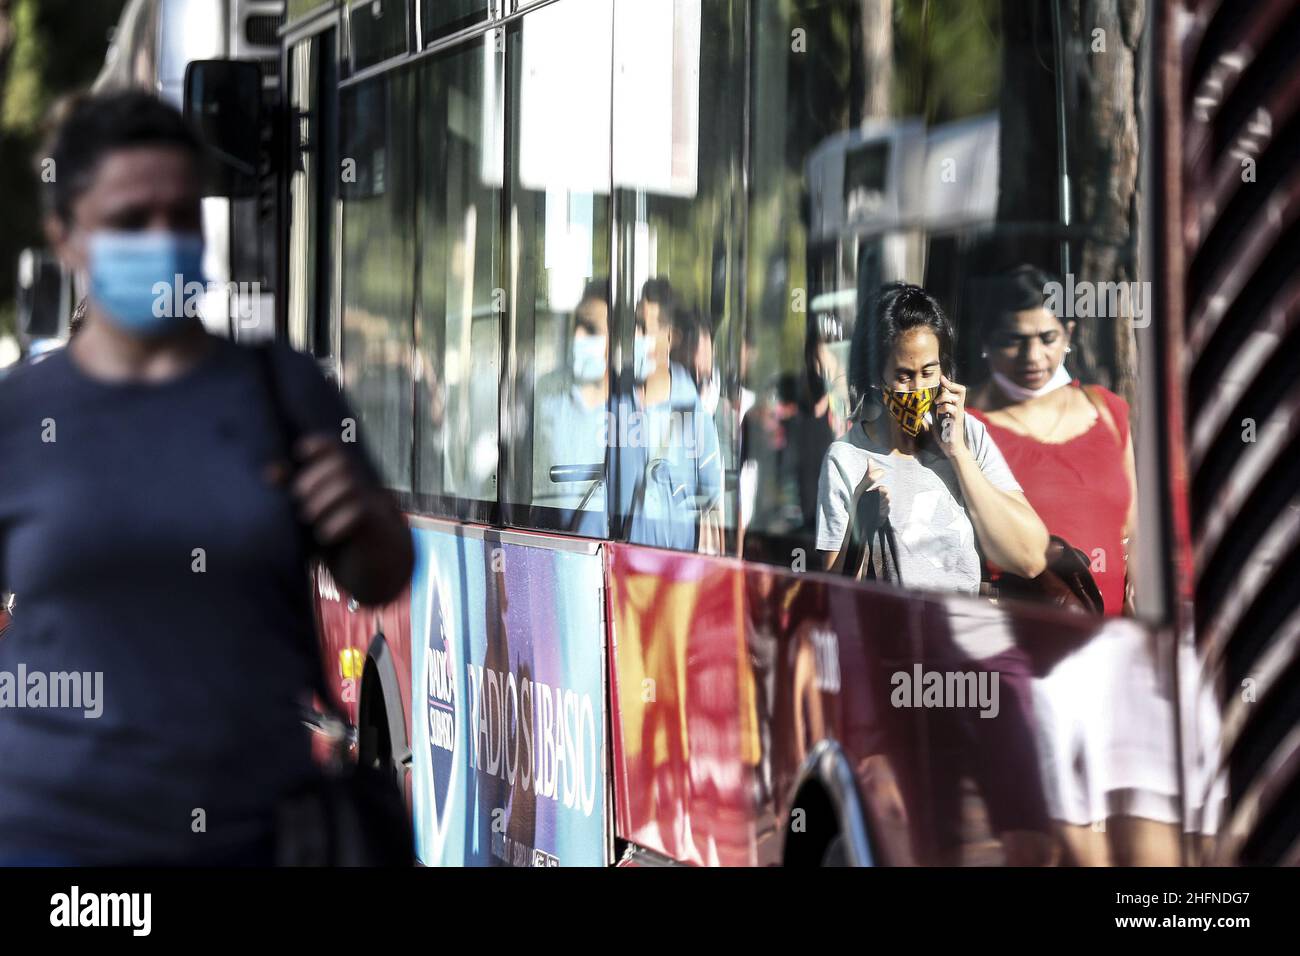 Cecilia Fabiano/LaPresse August 24 , 2020 Amatrice (Italy) News: Passengers and drivers with facial safety mask on Buses In the pic : buses on central station square Stock Photo